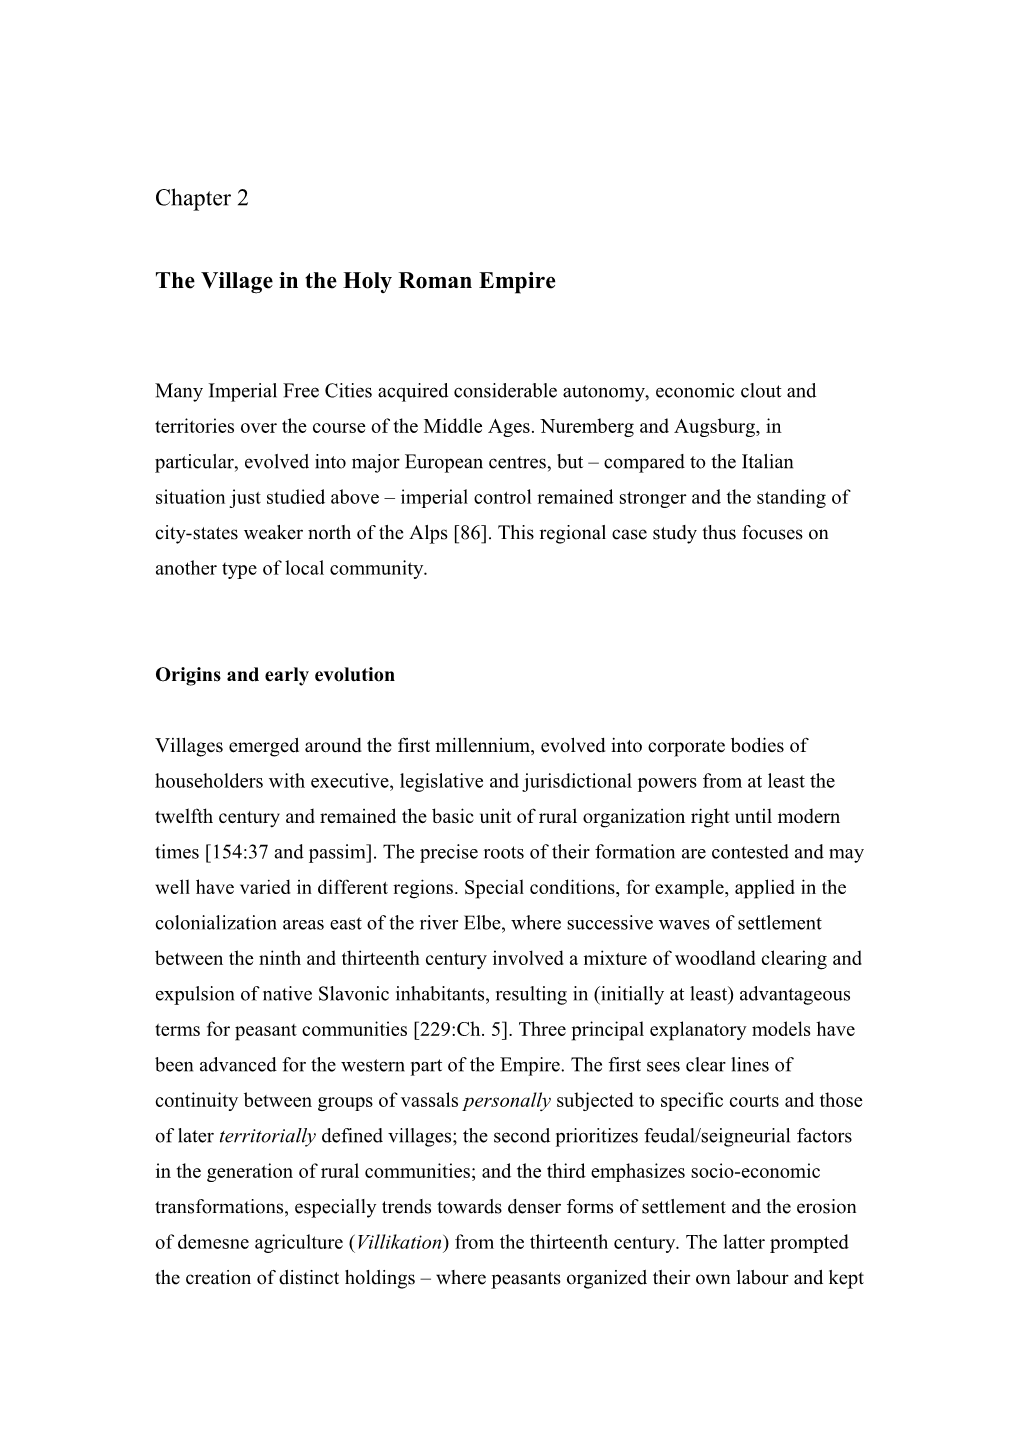 The Village in the Holy Roman Empire